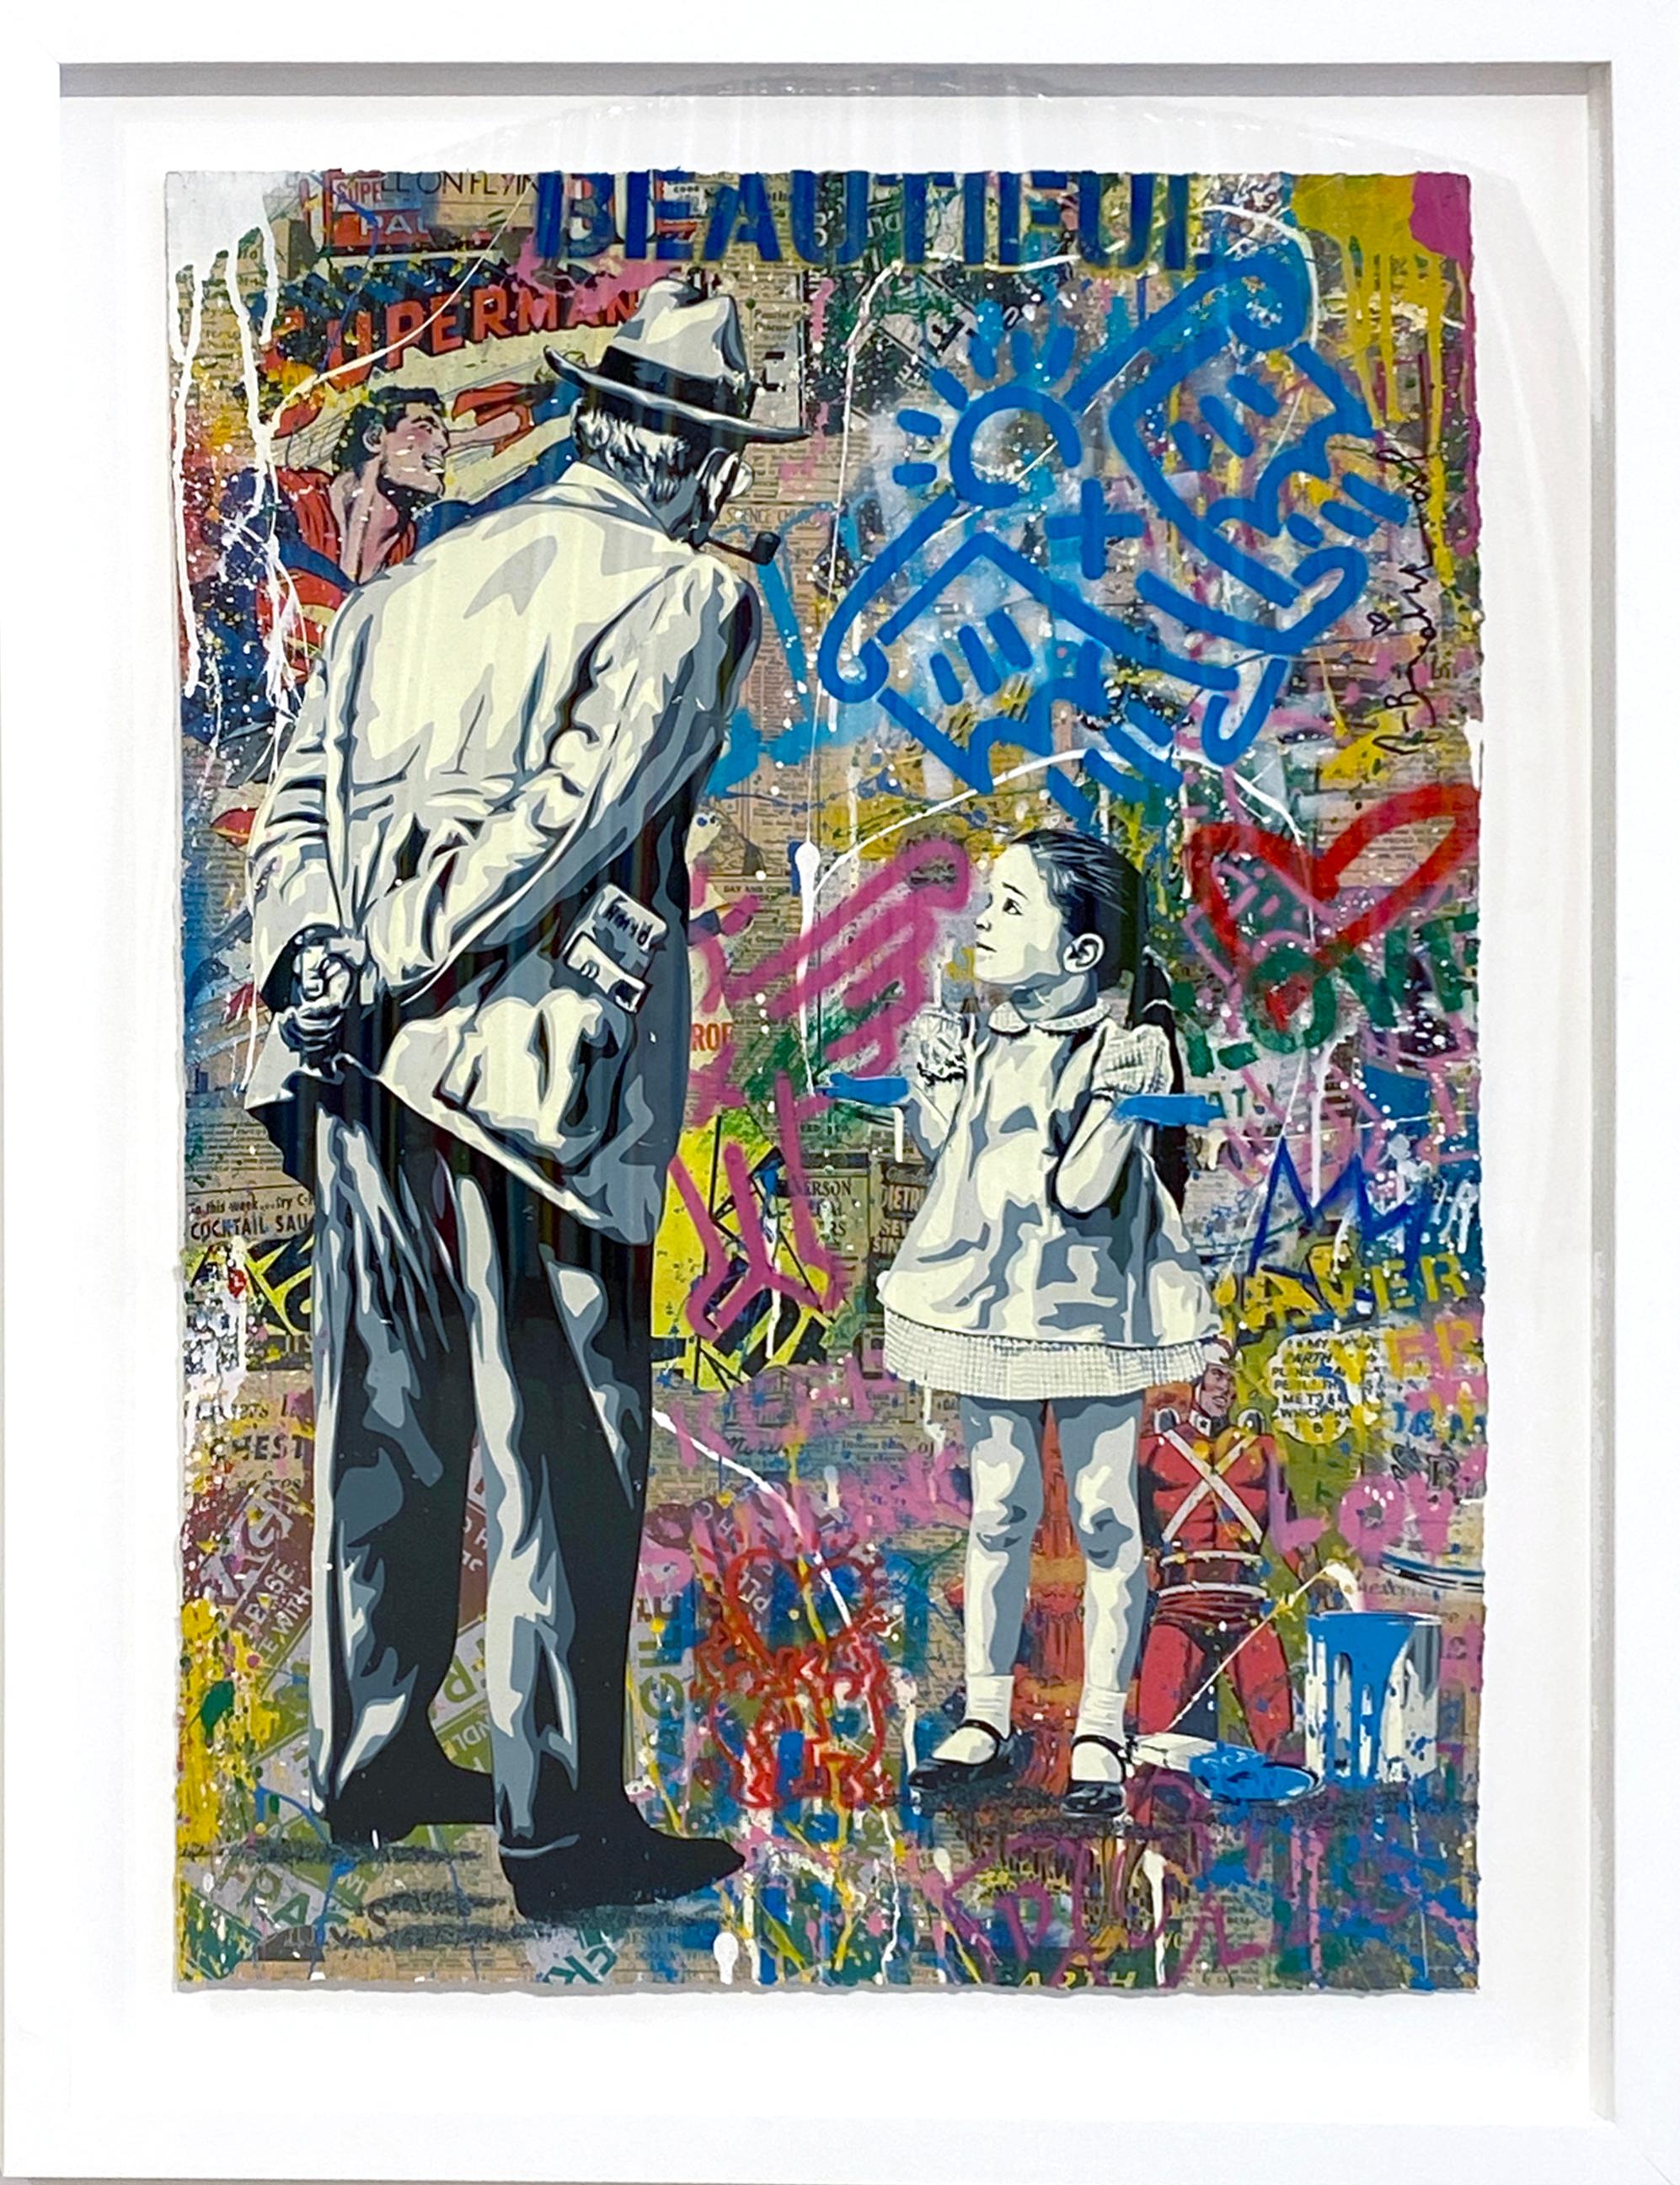 Caught Red Handed - Mixed Media Art by Mr. Brainwash